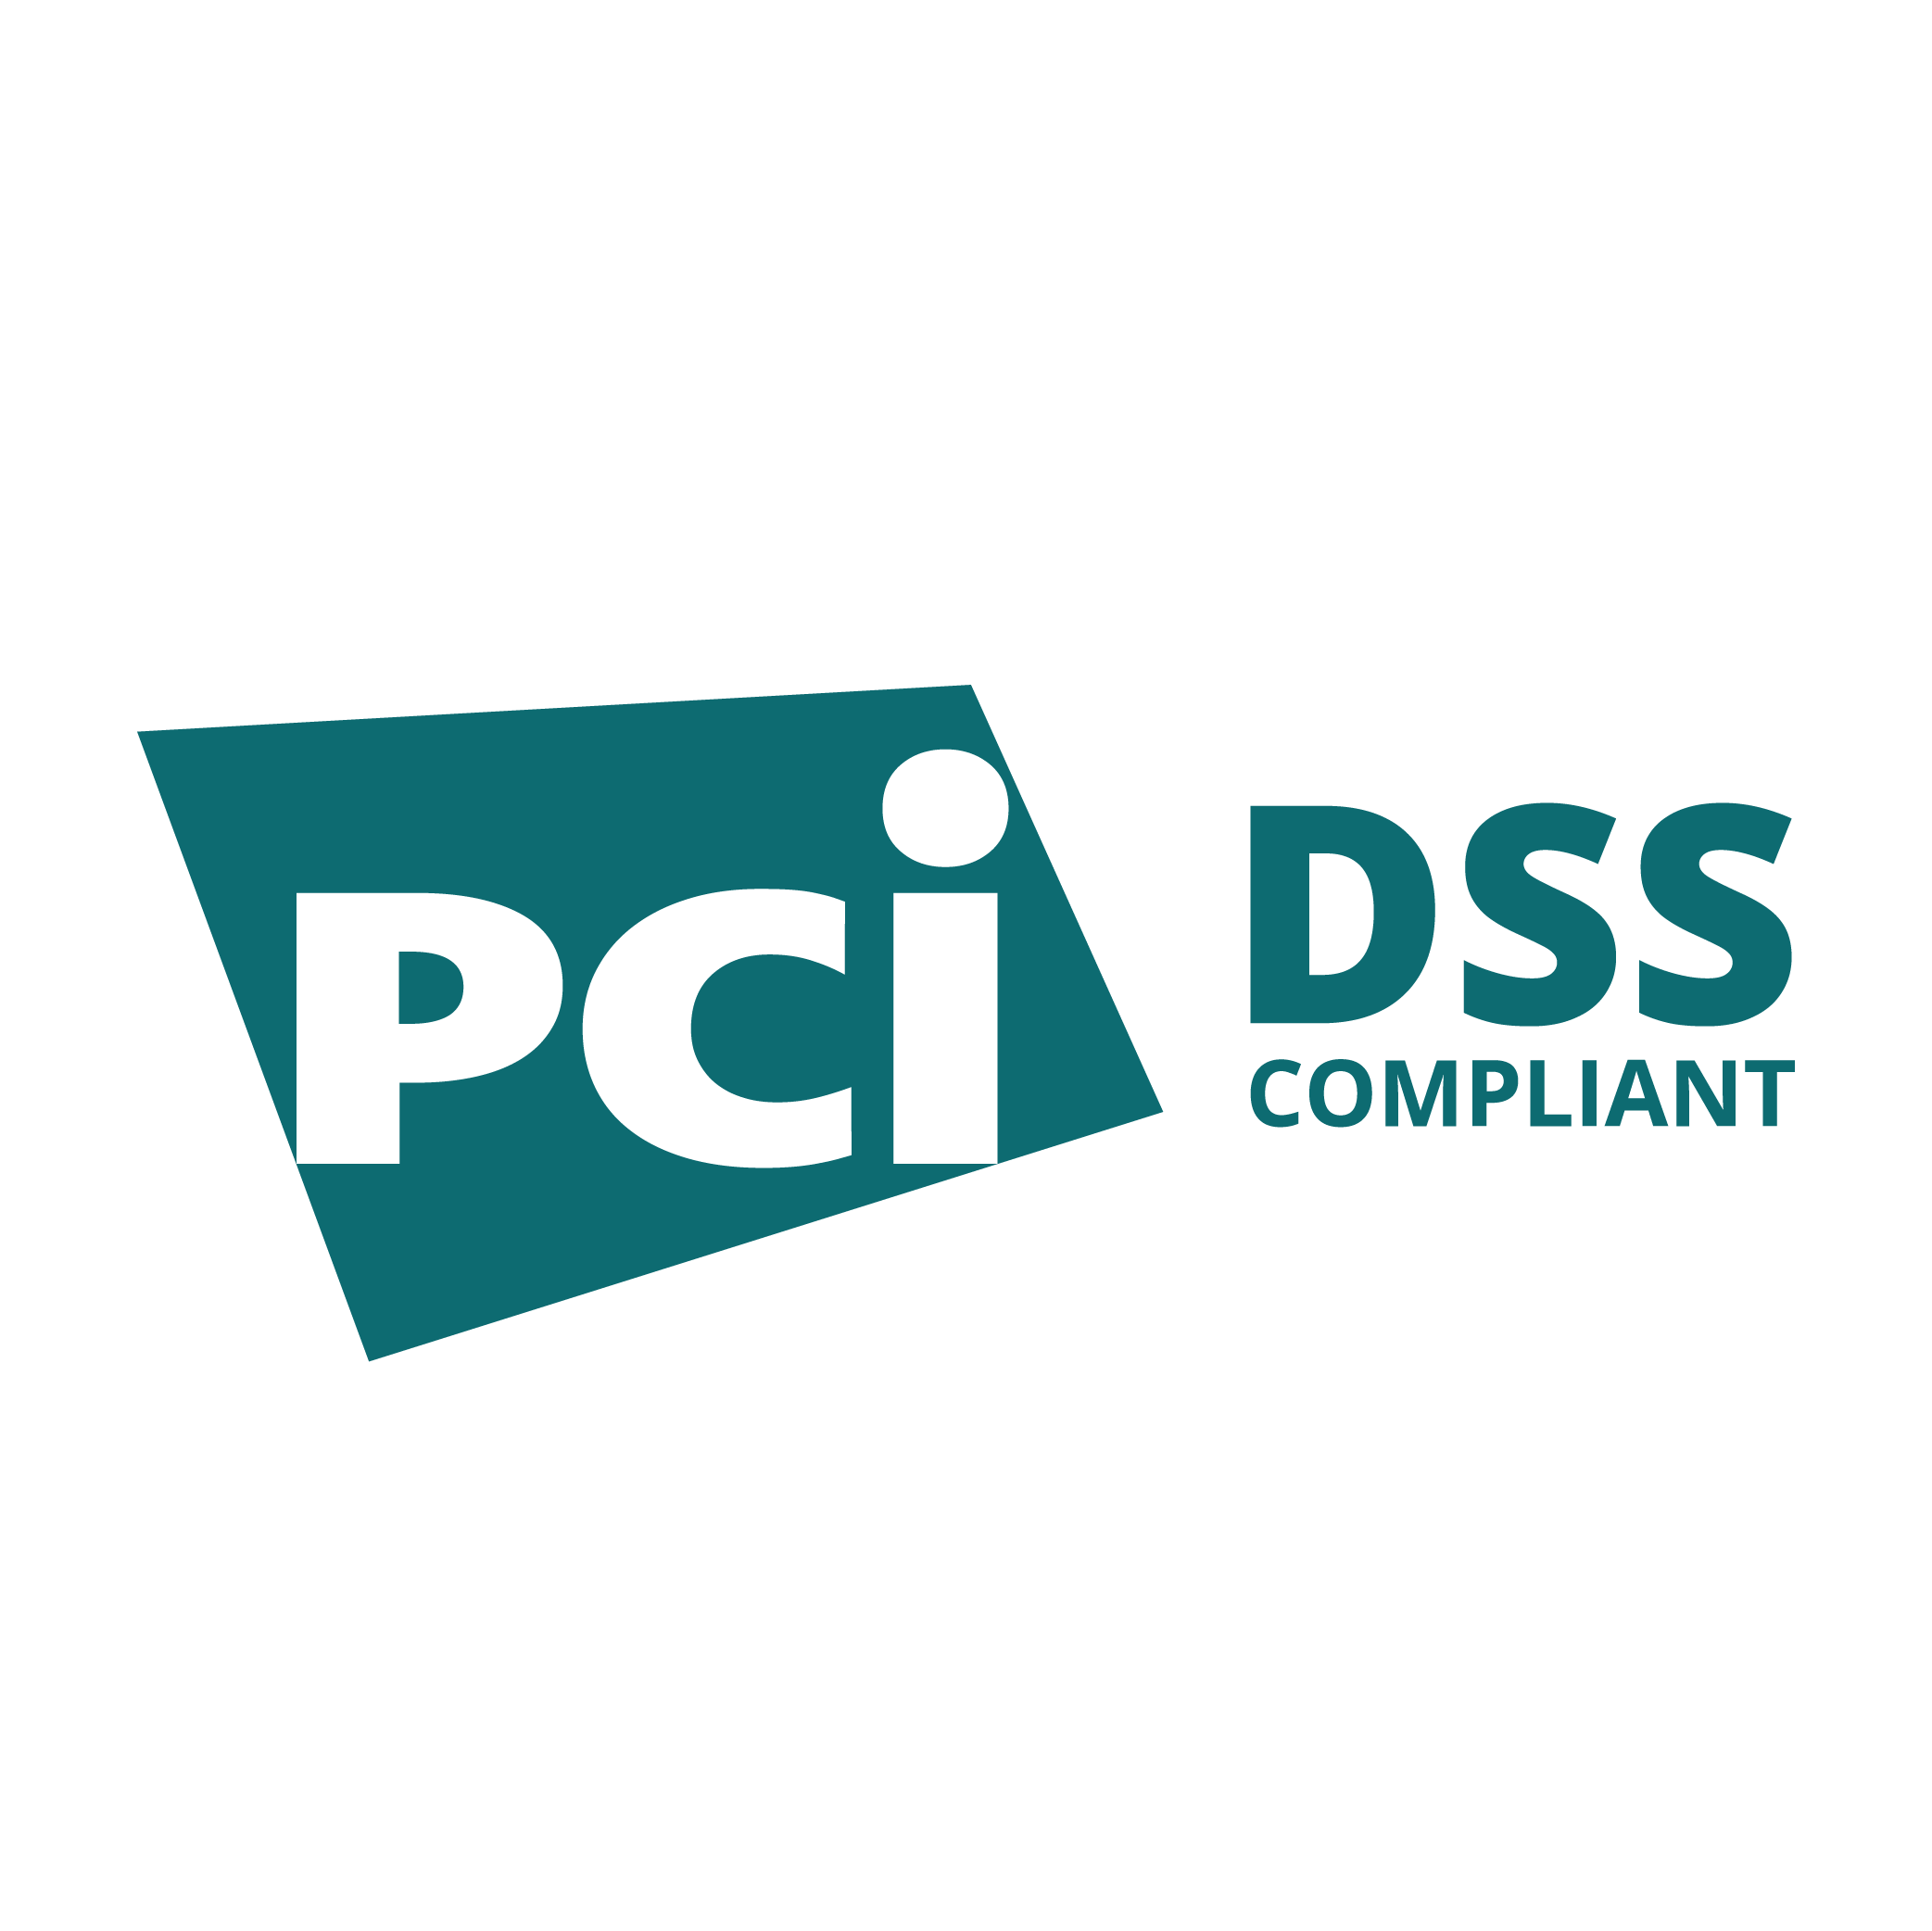 An image of PCI DSS logo